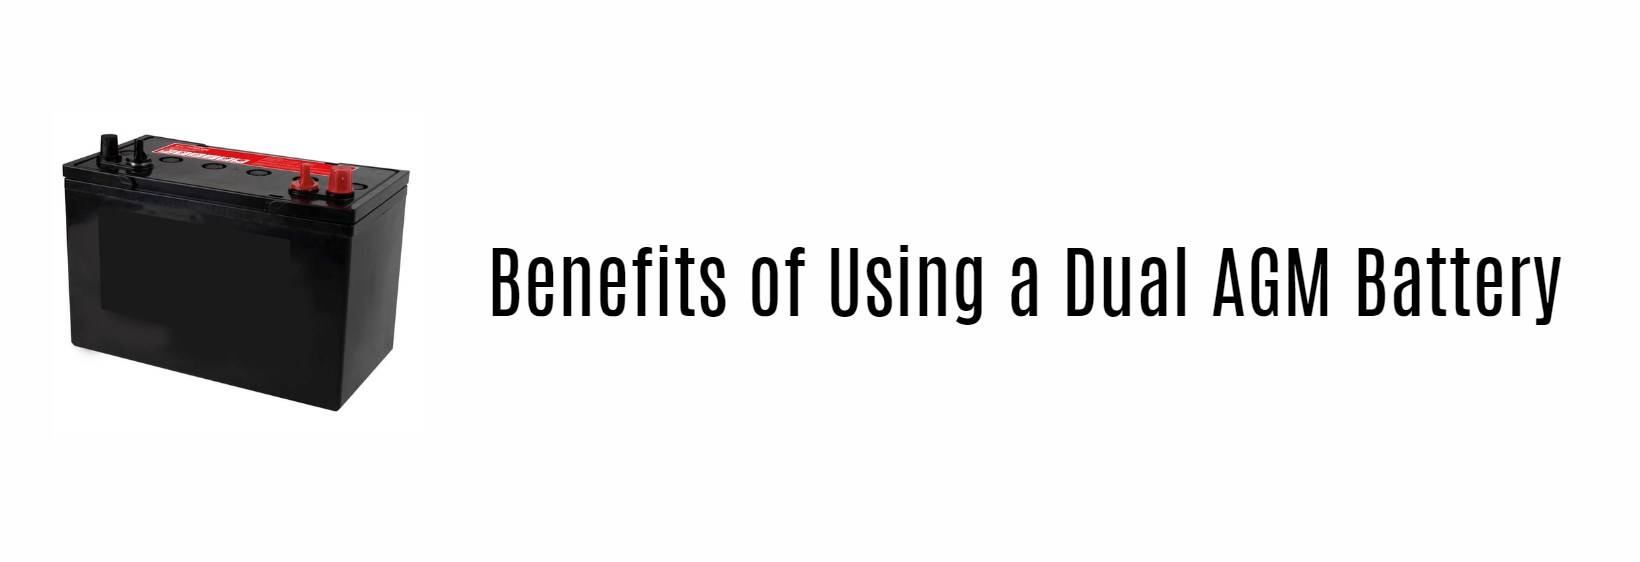 Benefits of Using a Dual AGM Battery